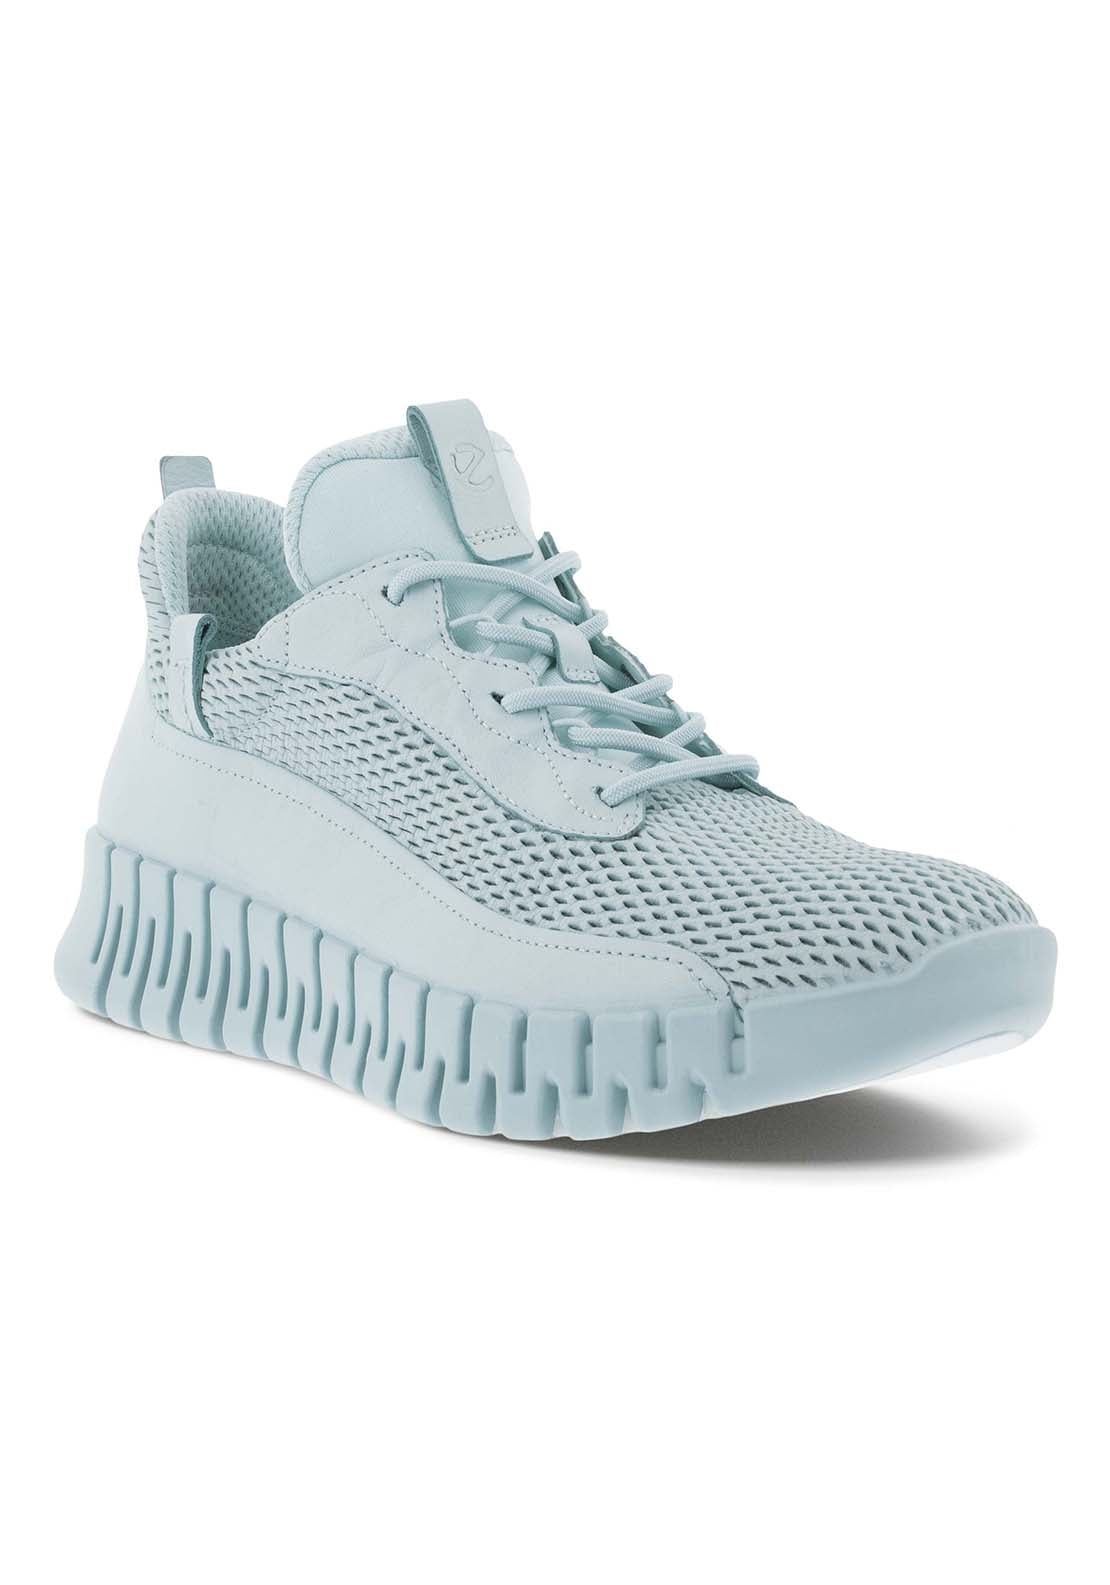 Ecco Gruuv Casual Runner 1 Shaws Department Stores